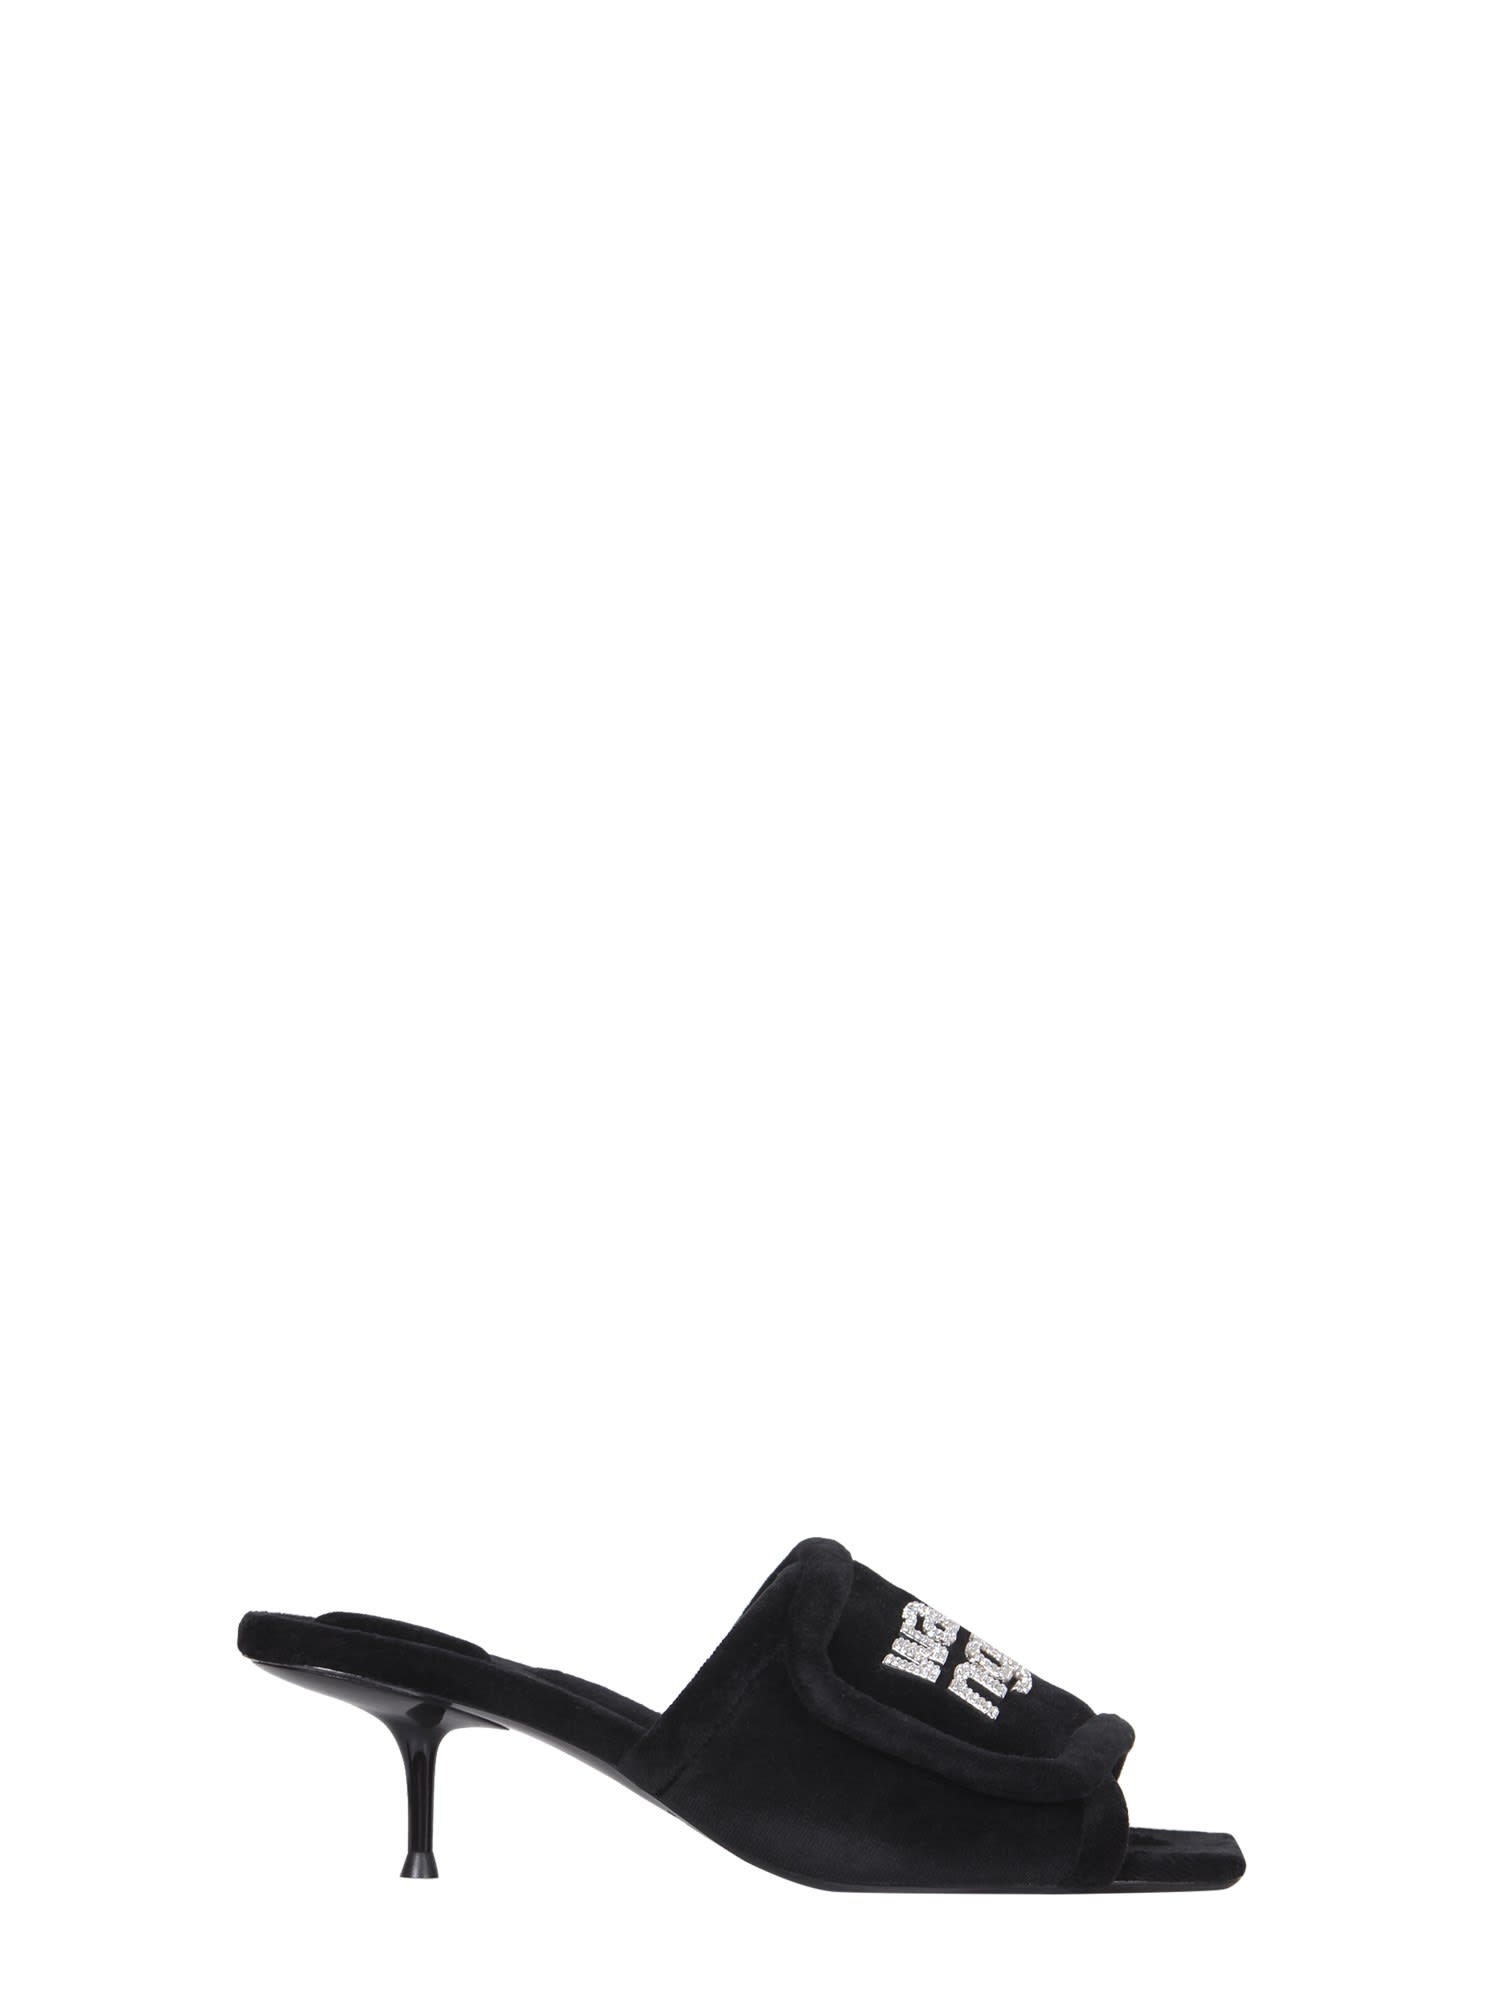 Buy Alexander Wang Jessie Sandals online, shop Alexander Wang shoes with free shipping